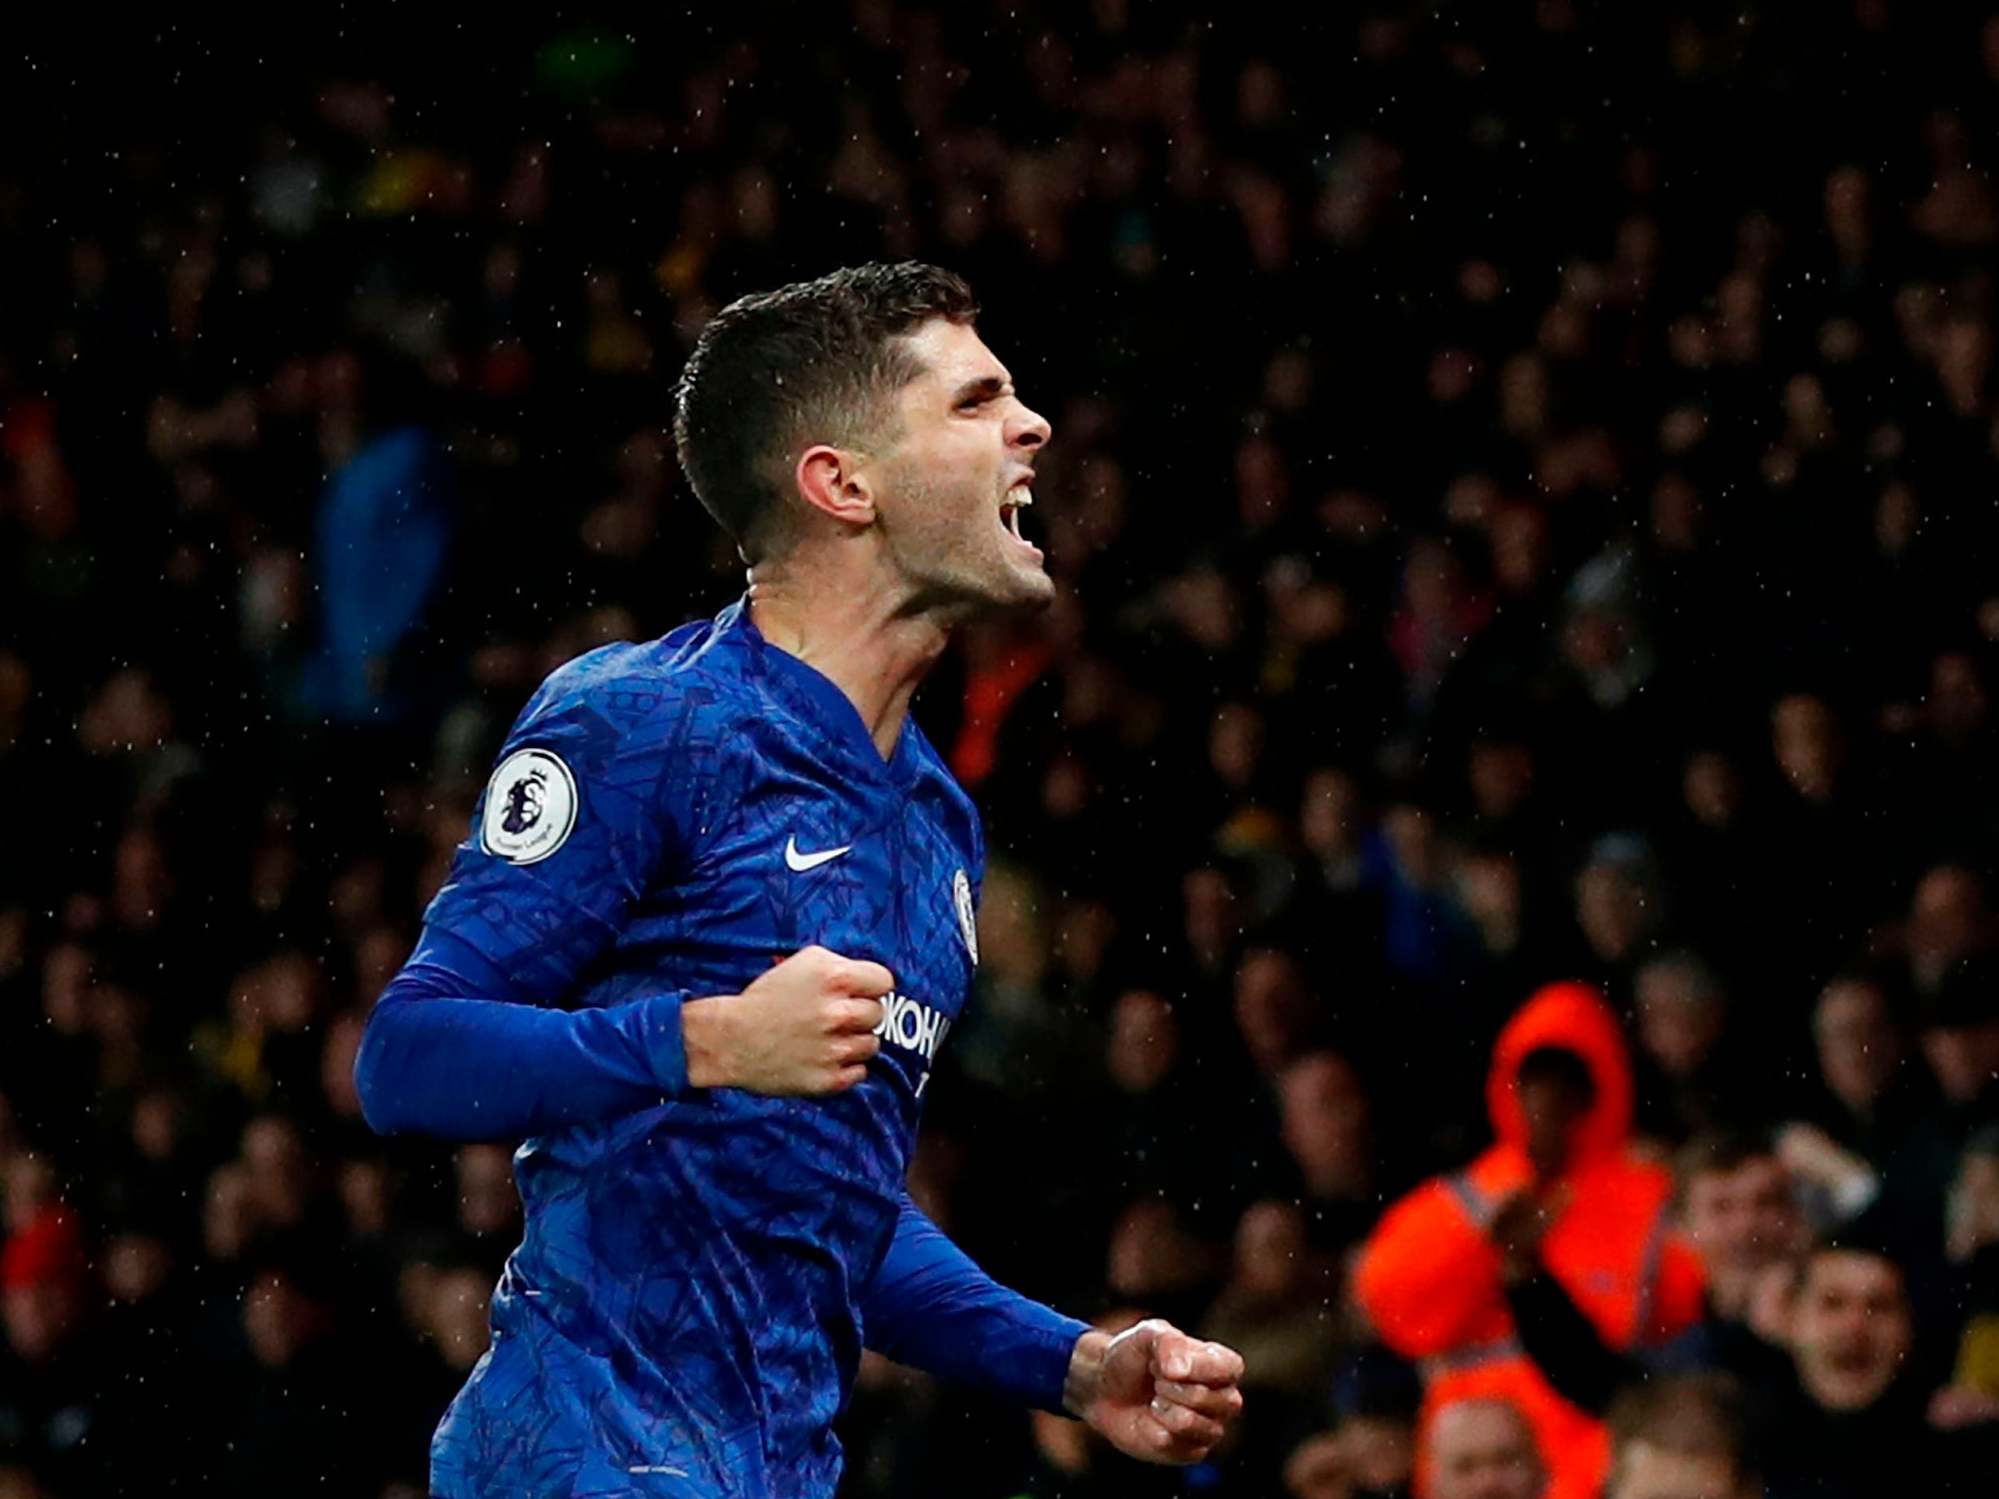 Pulisic roars in delight after scoring for Chelsea